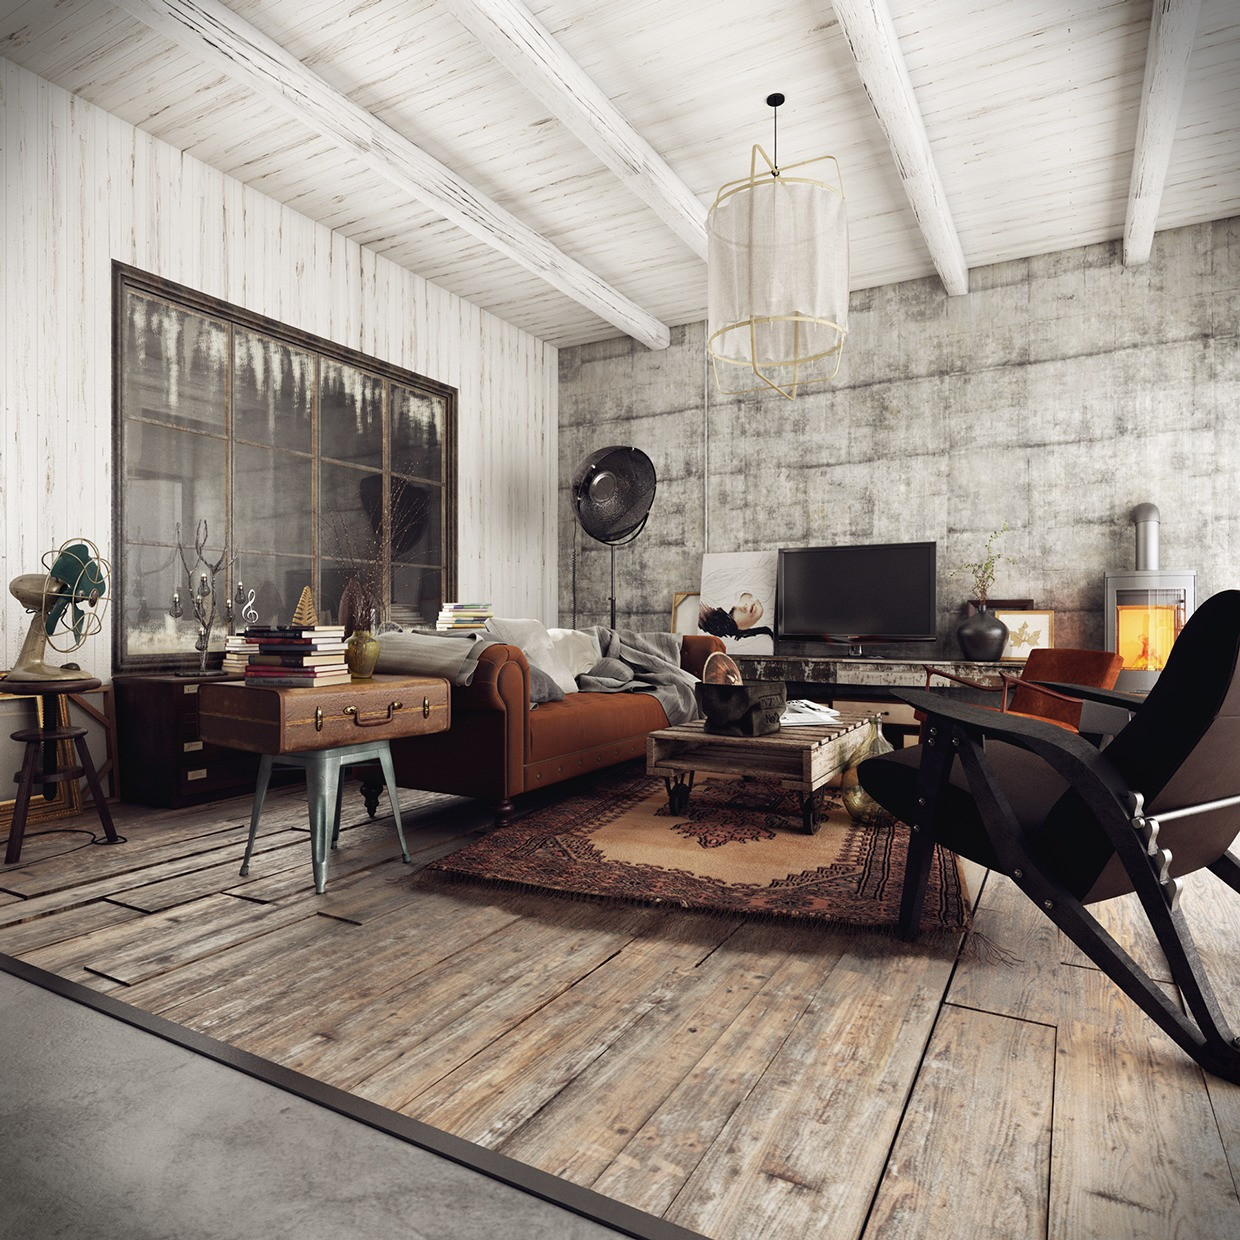 Rustic Industrial Living Room
 The living room of a rustic home with an industrial